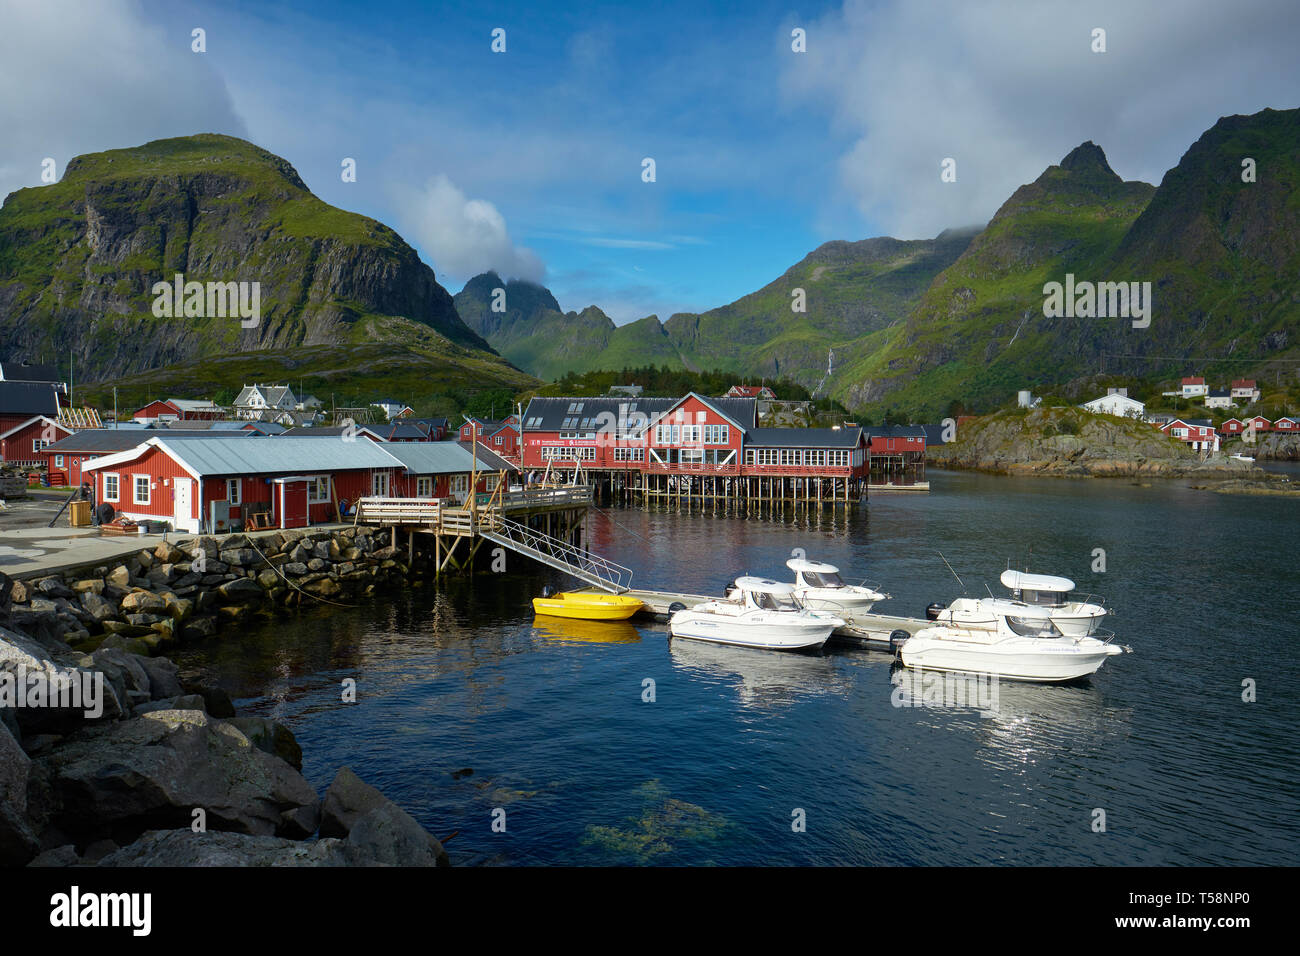 The traditional Norwegian buildings and landscape of the small fishing village and port of Å on Moskenesøya, Lofoten islands Norway Stock Photo